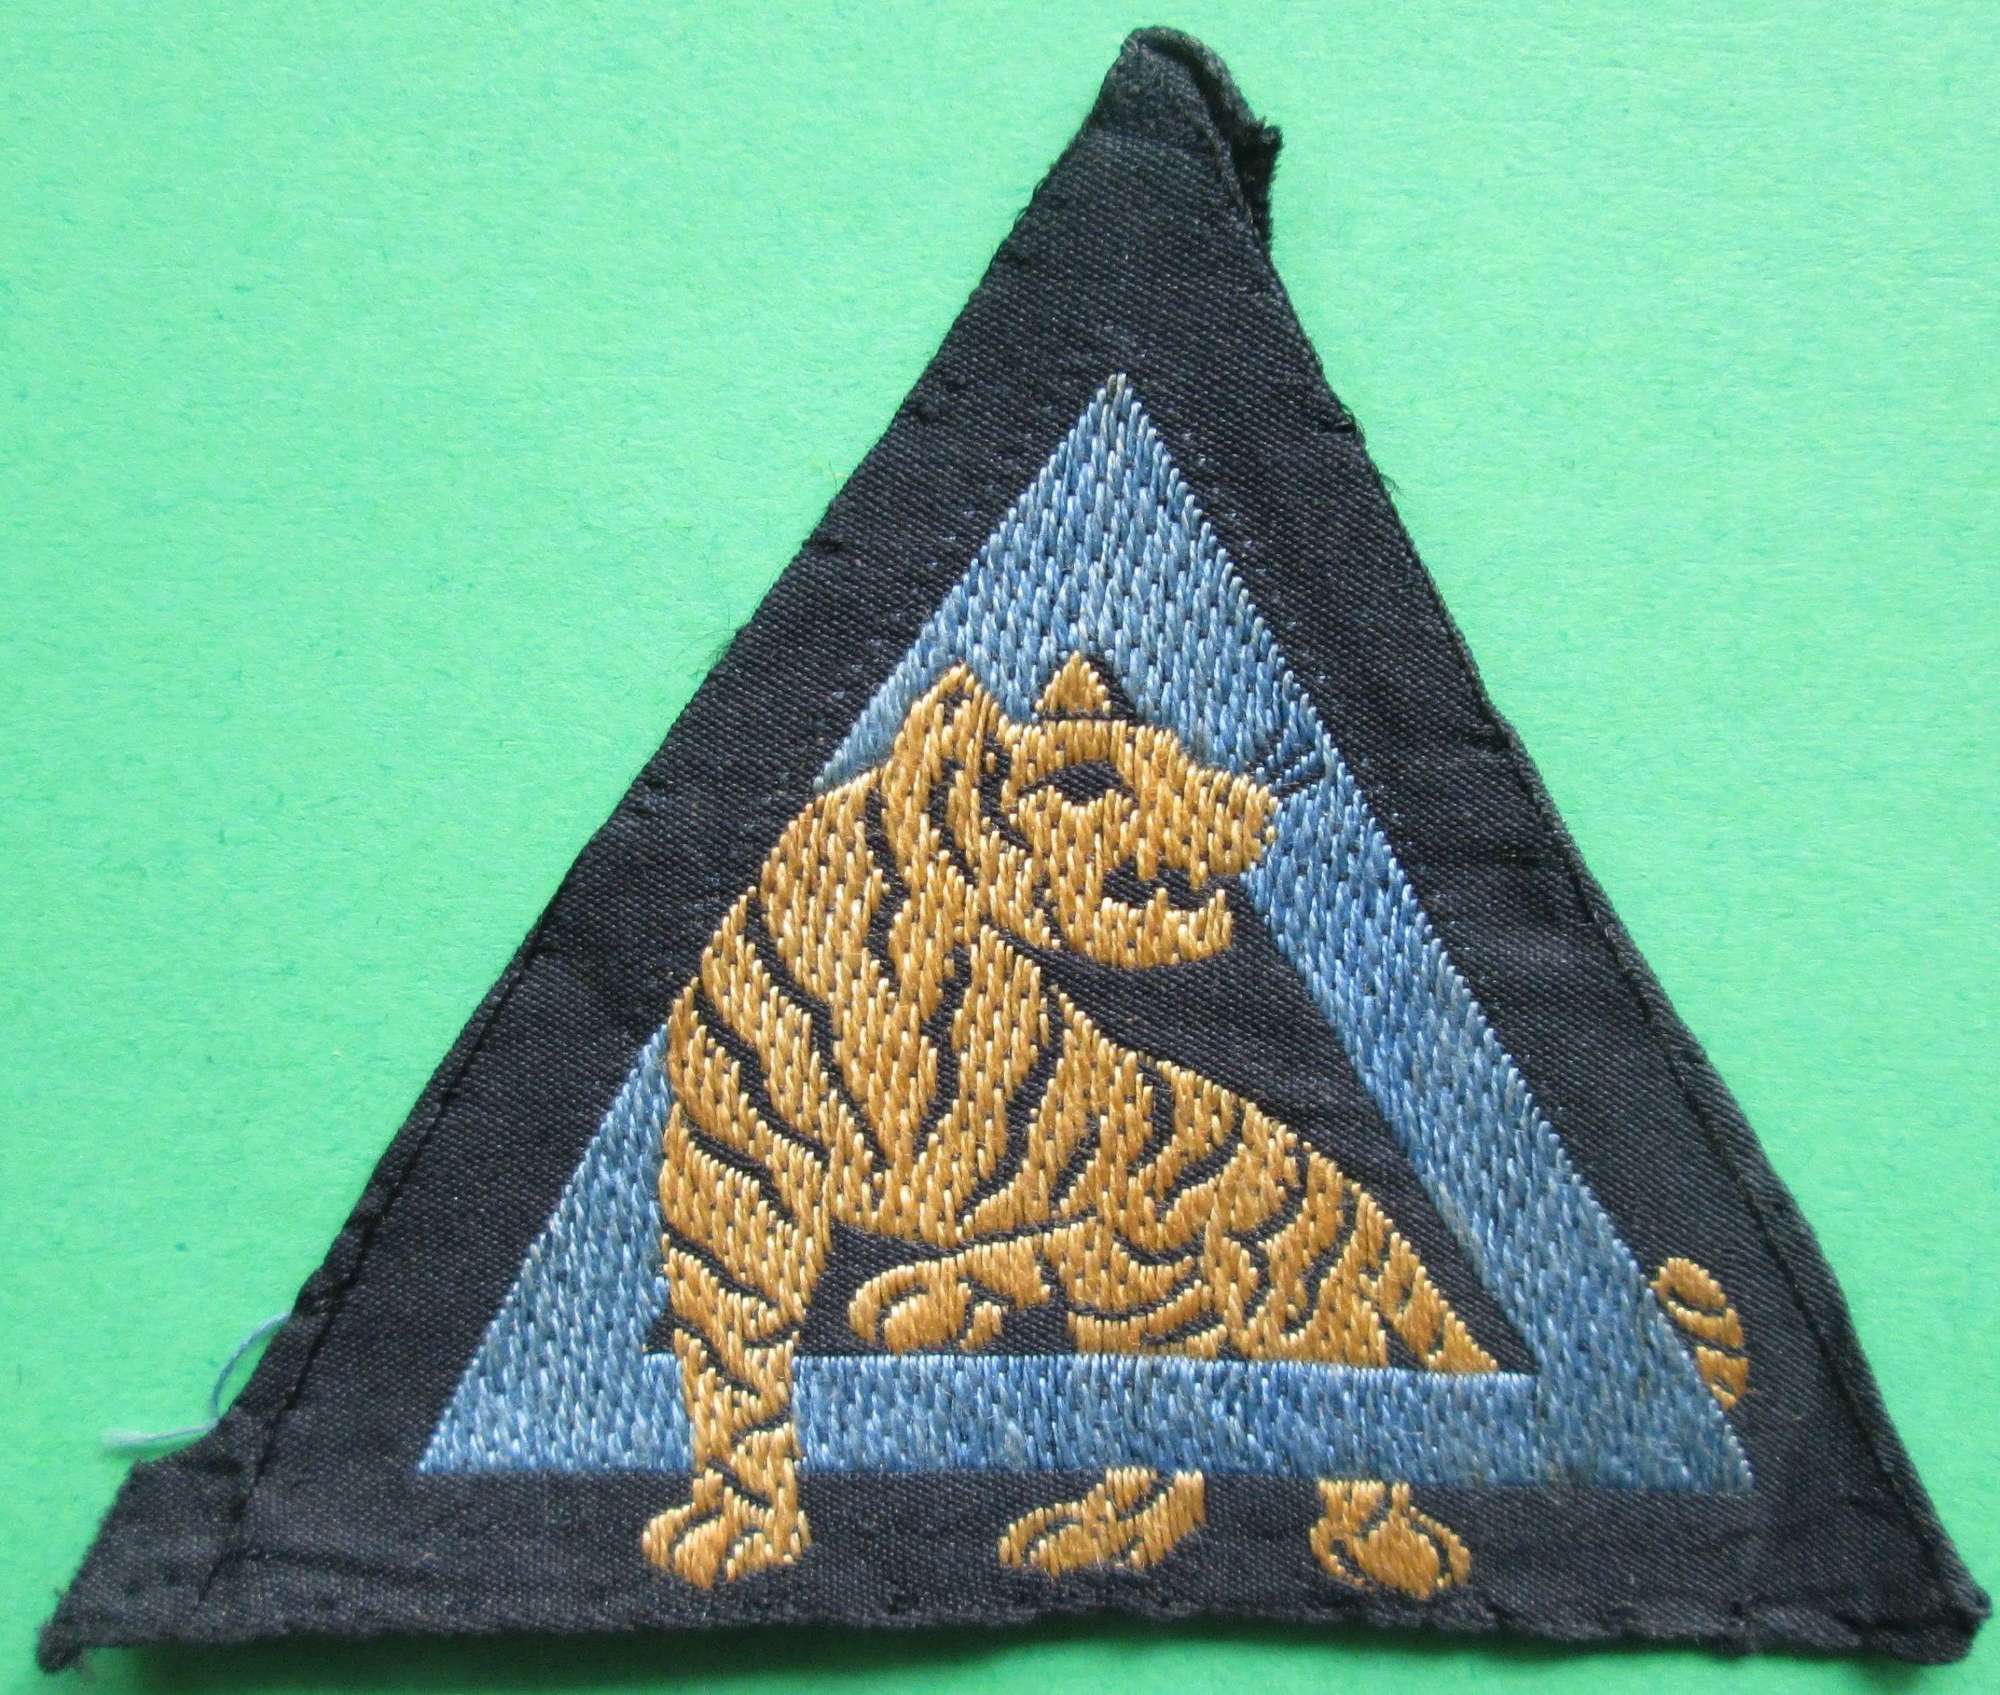 A 26TH INDIAN DIVISION FORMATION SIGN